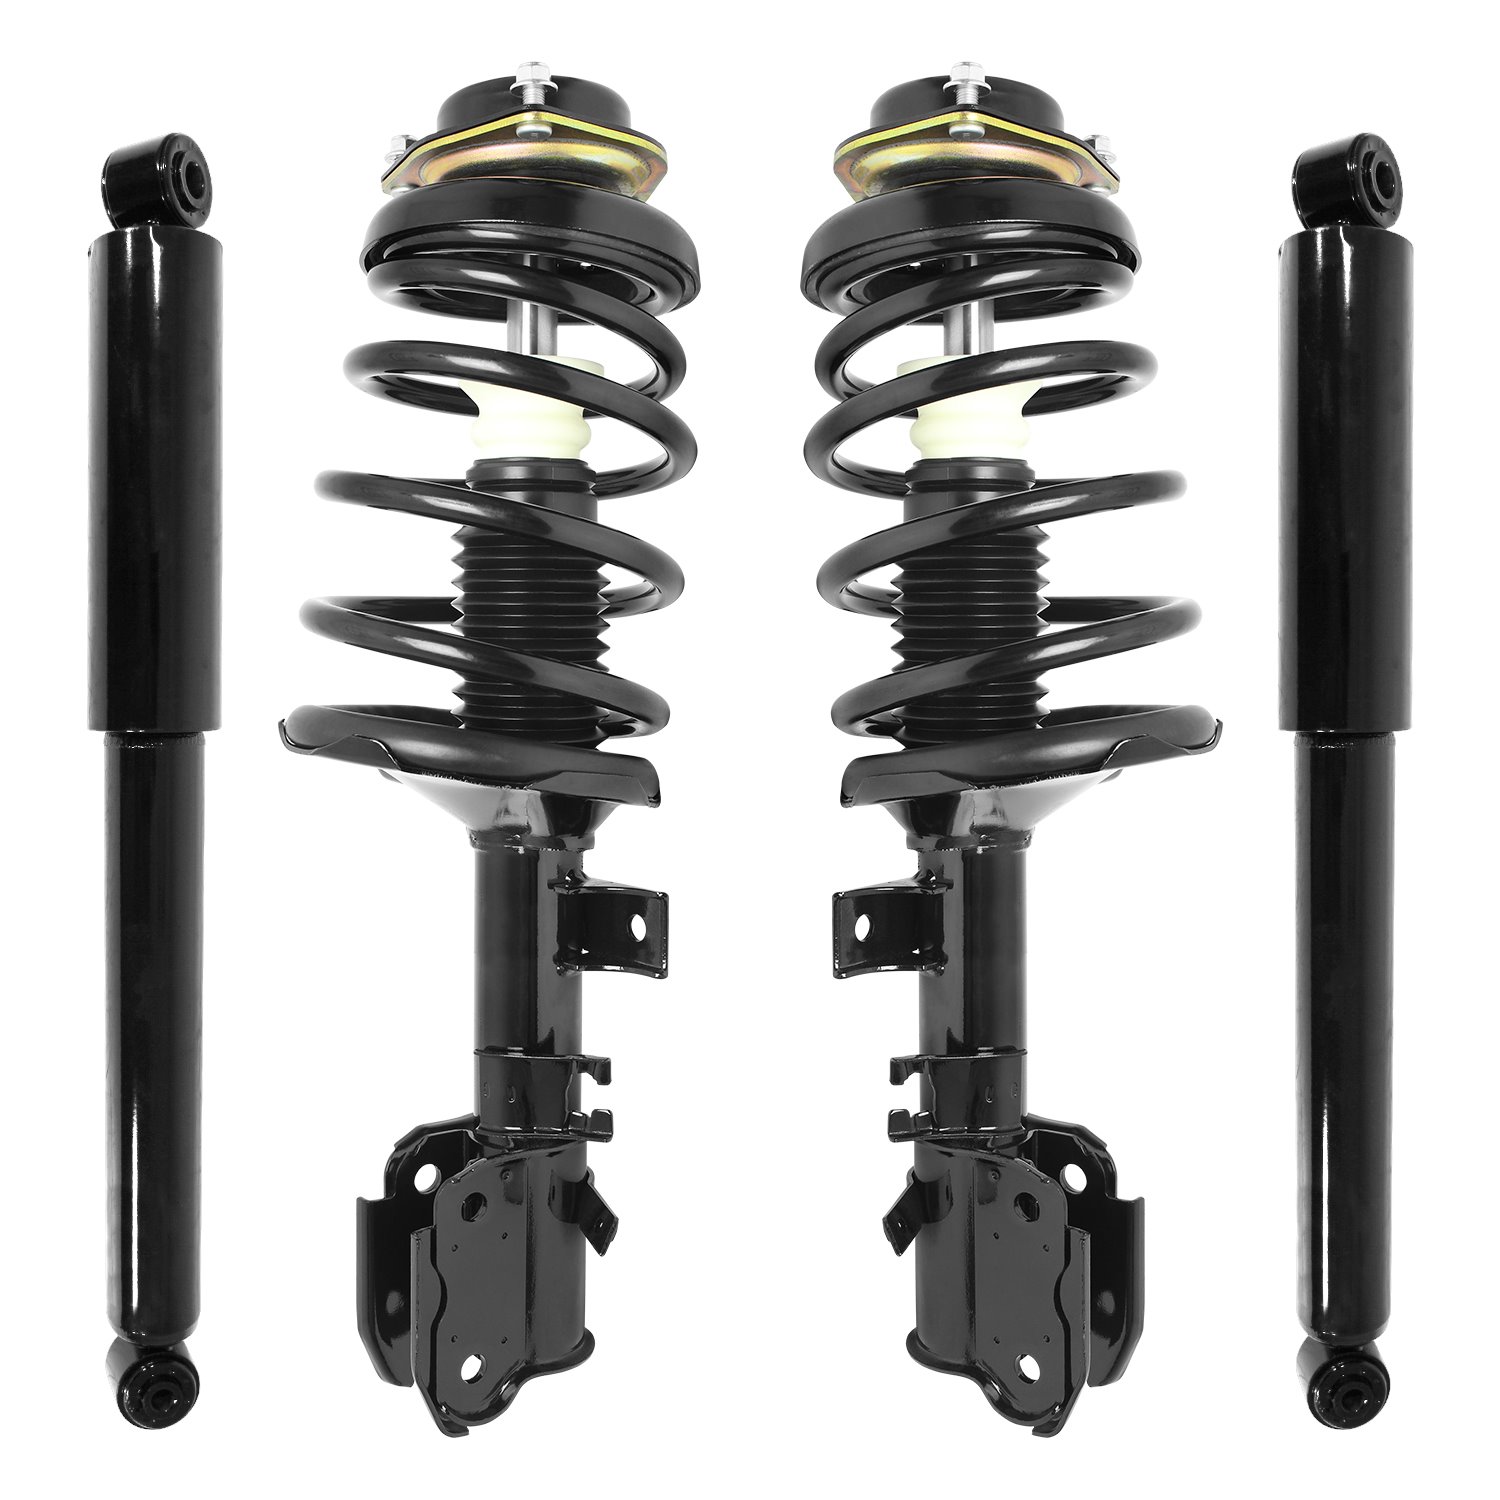 4-11315-255420-001 Front & Rear Suspension Strut & Coil Spring Assembly Fits Select Nissan Pathfinder, Infiniti QX4